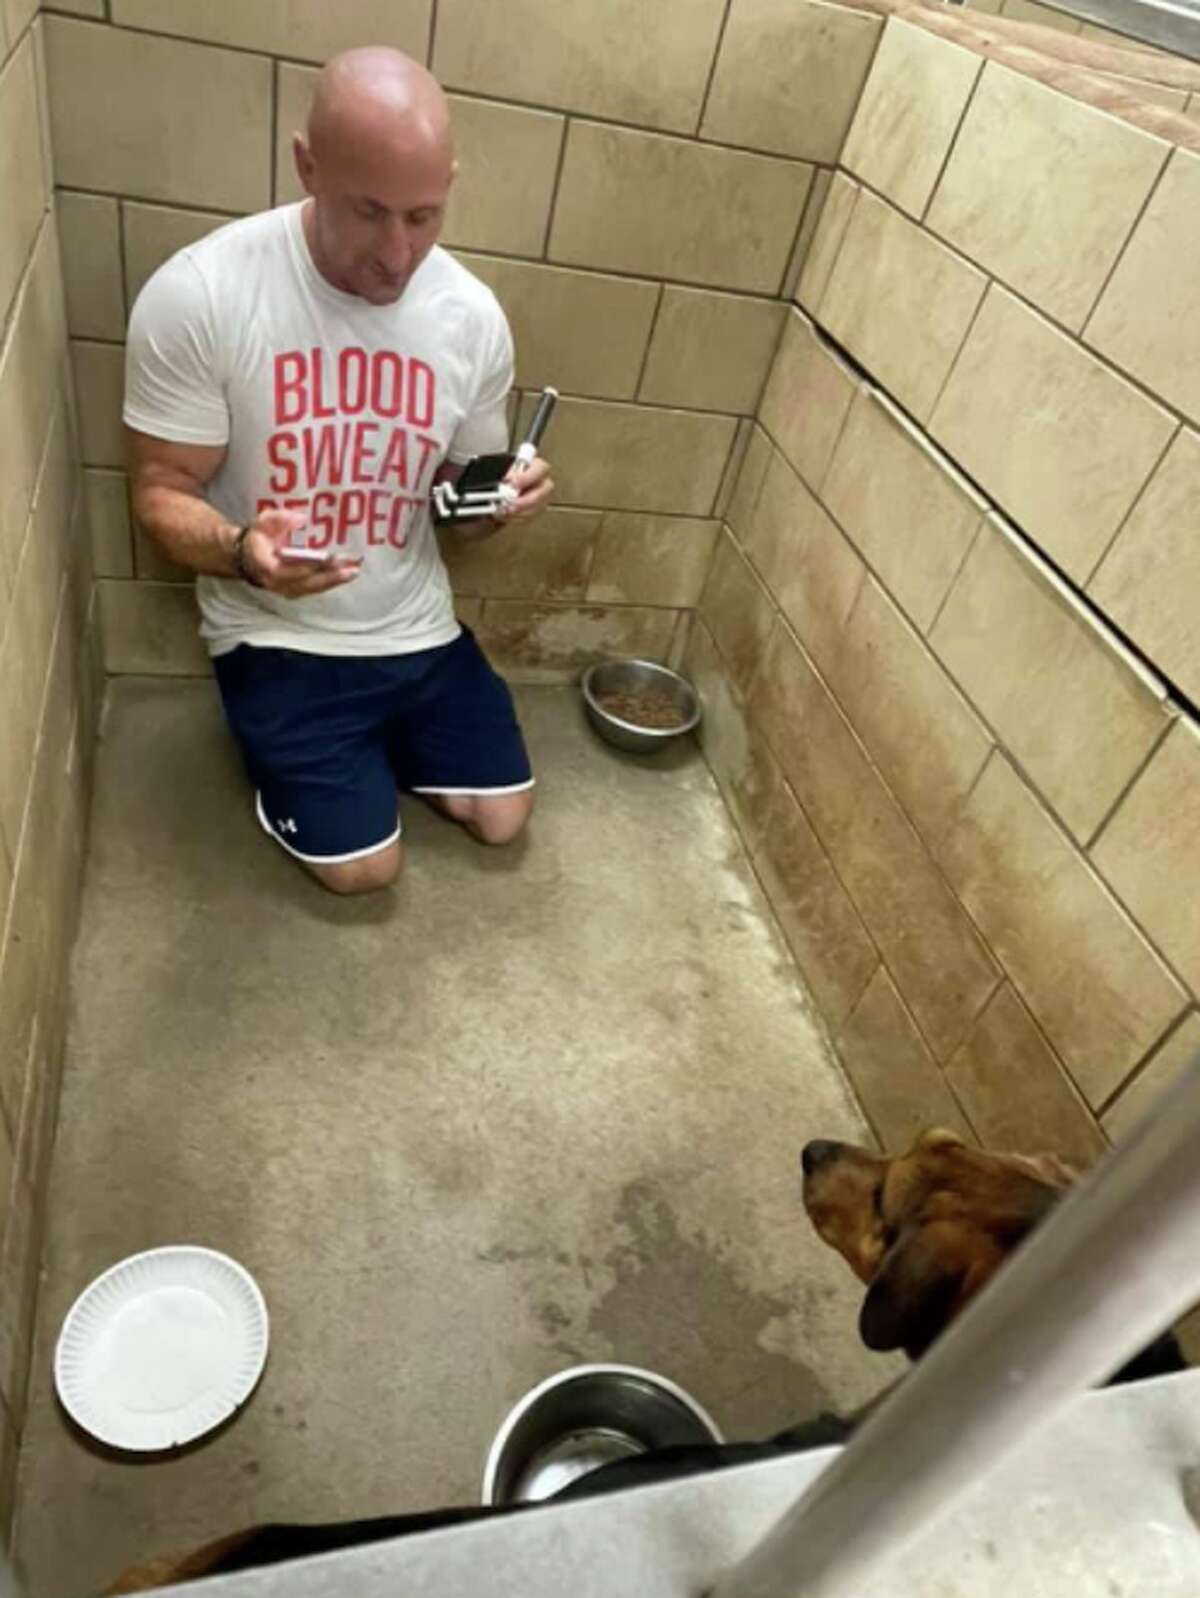 After his shelter dog, Jordan, passed away in 2018, Kris Rotonda started hosting Facebook Livestream marathons to increase adoption awareness and raise money for shelters across the U.S. He spent Tuesday night helping Paws Pet Adoption of Plainview. 